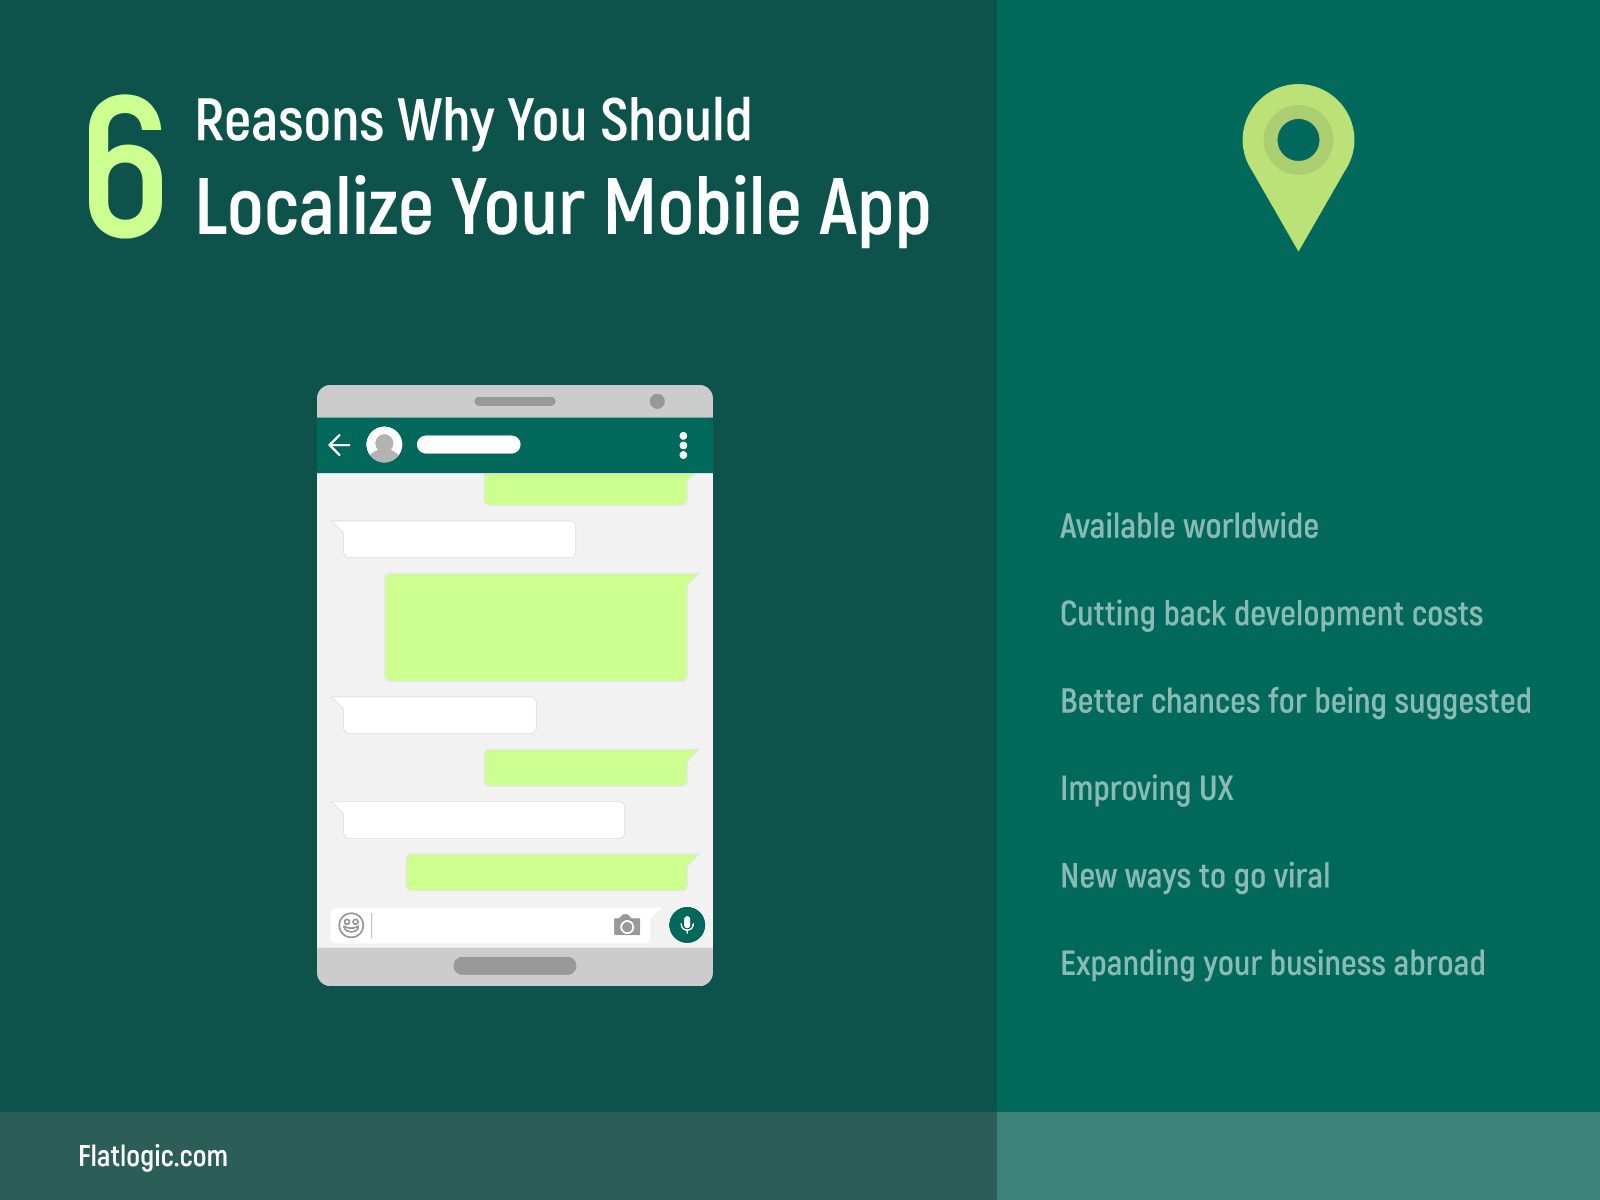 6 Reasons Why You Should Localize Your Mobile App